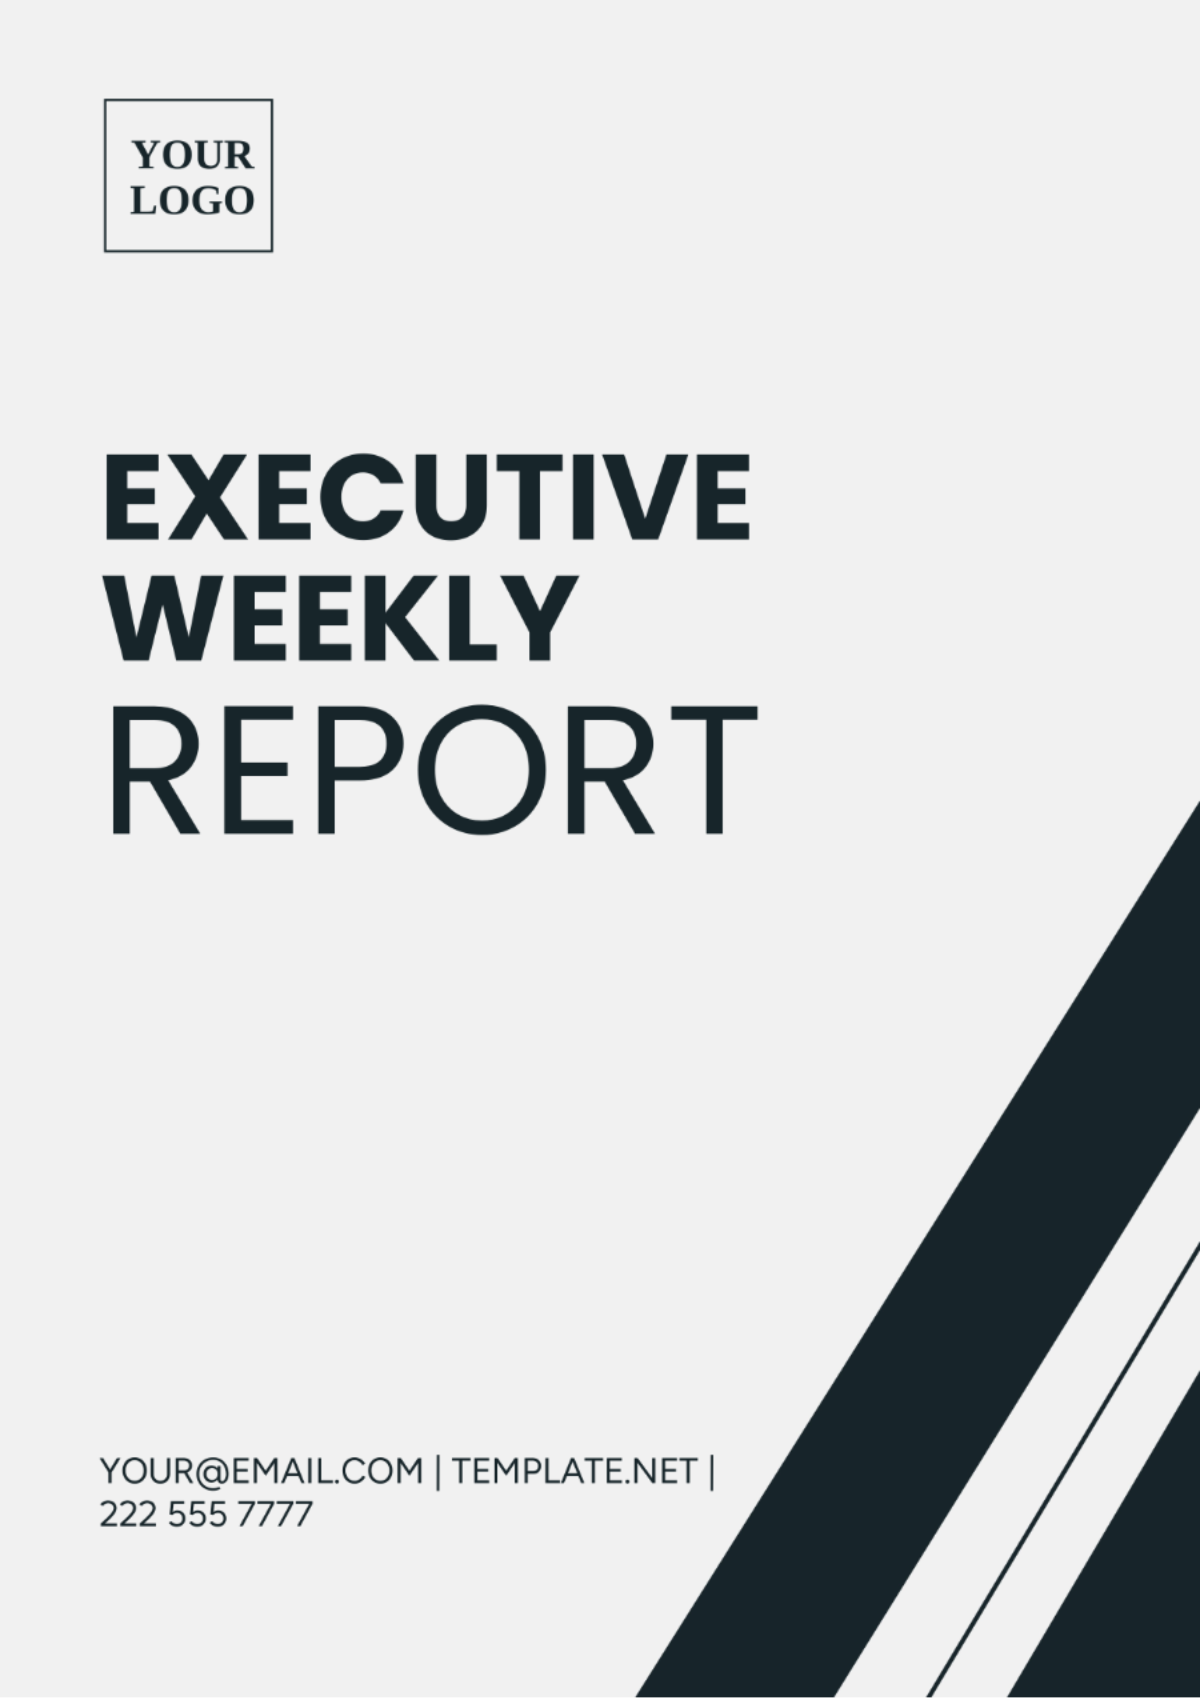 Executive Weekly Report Template